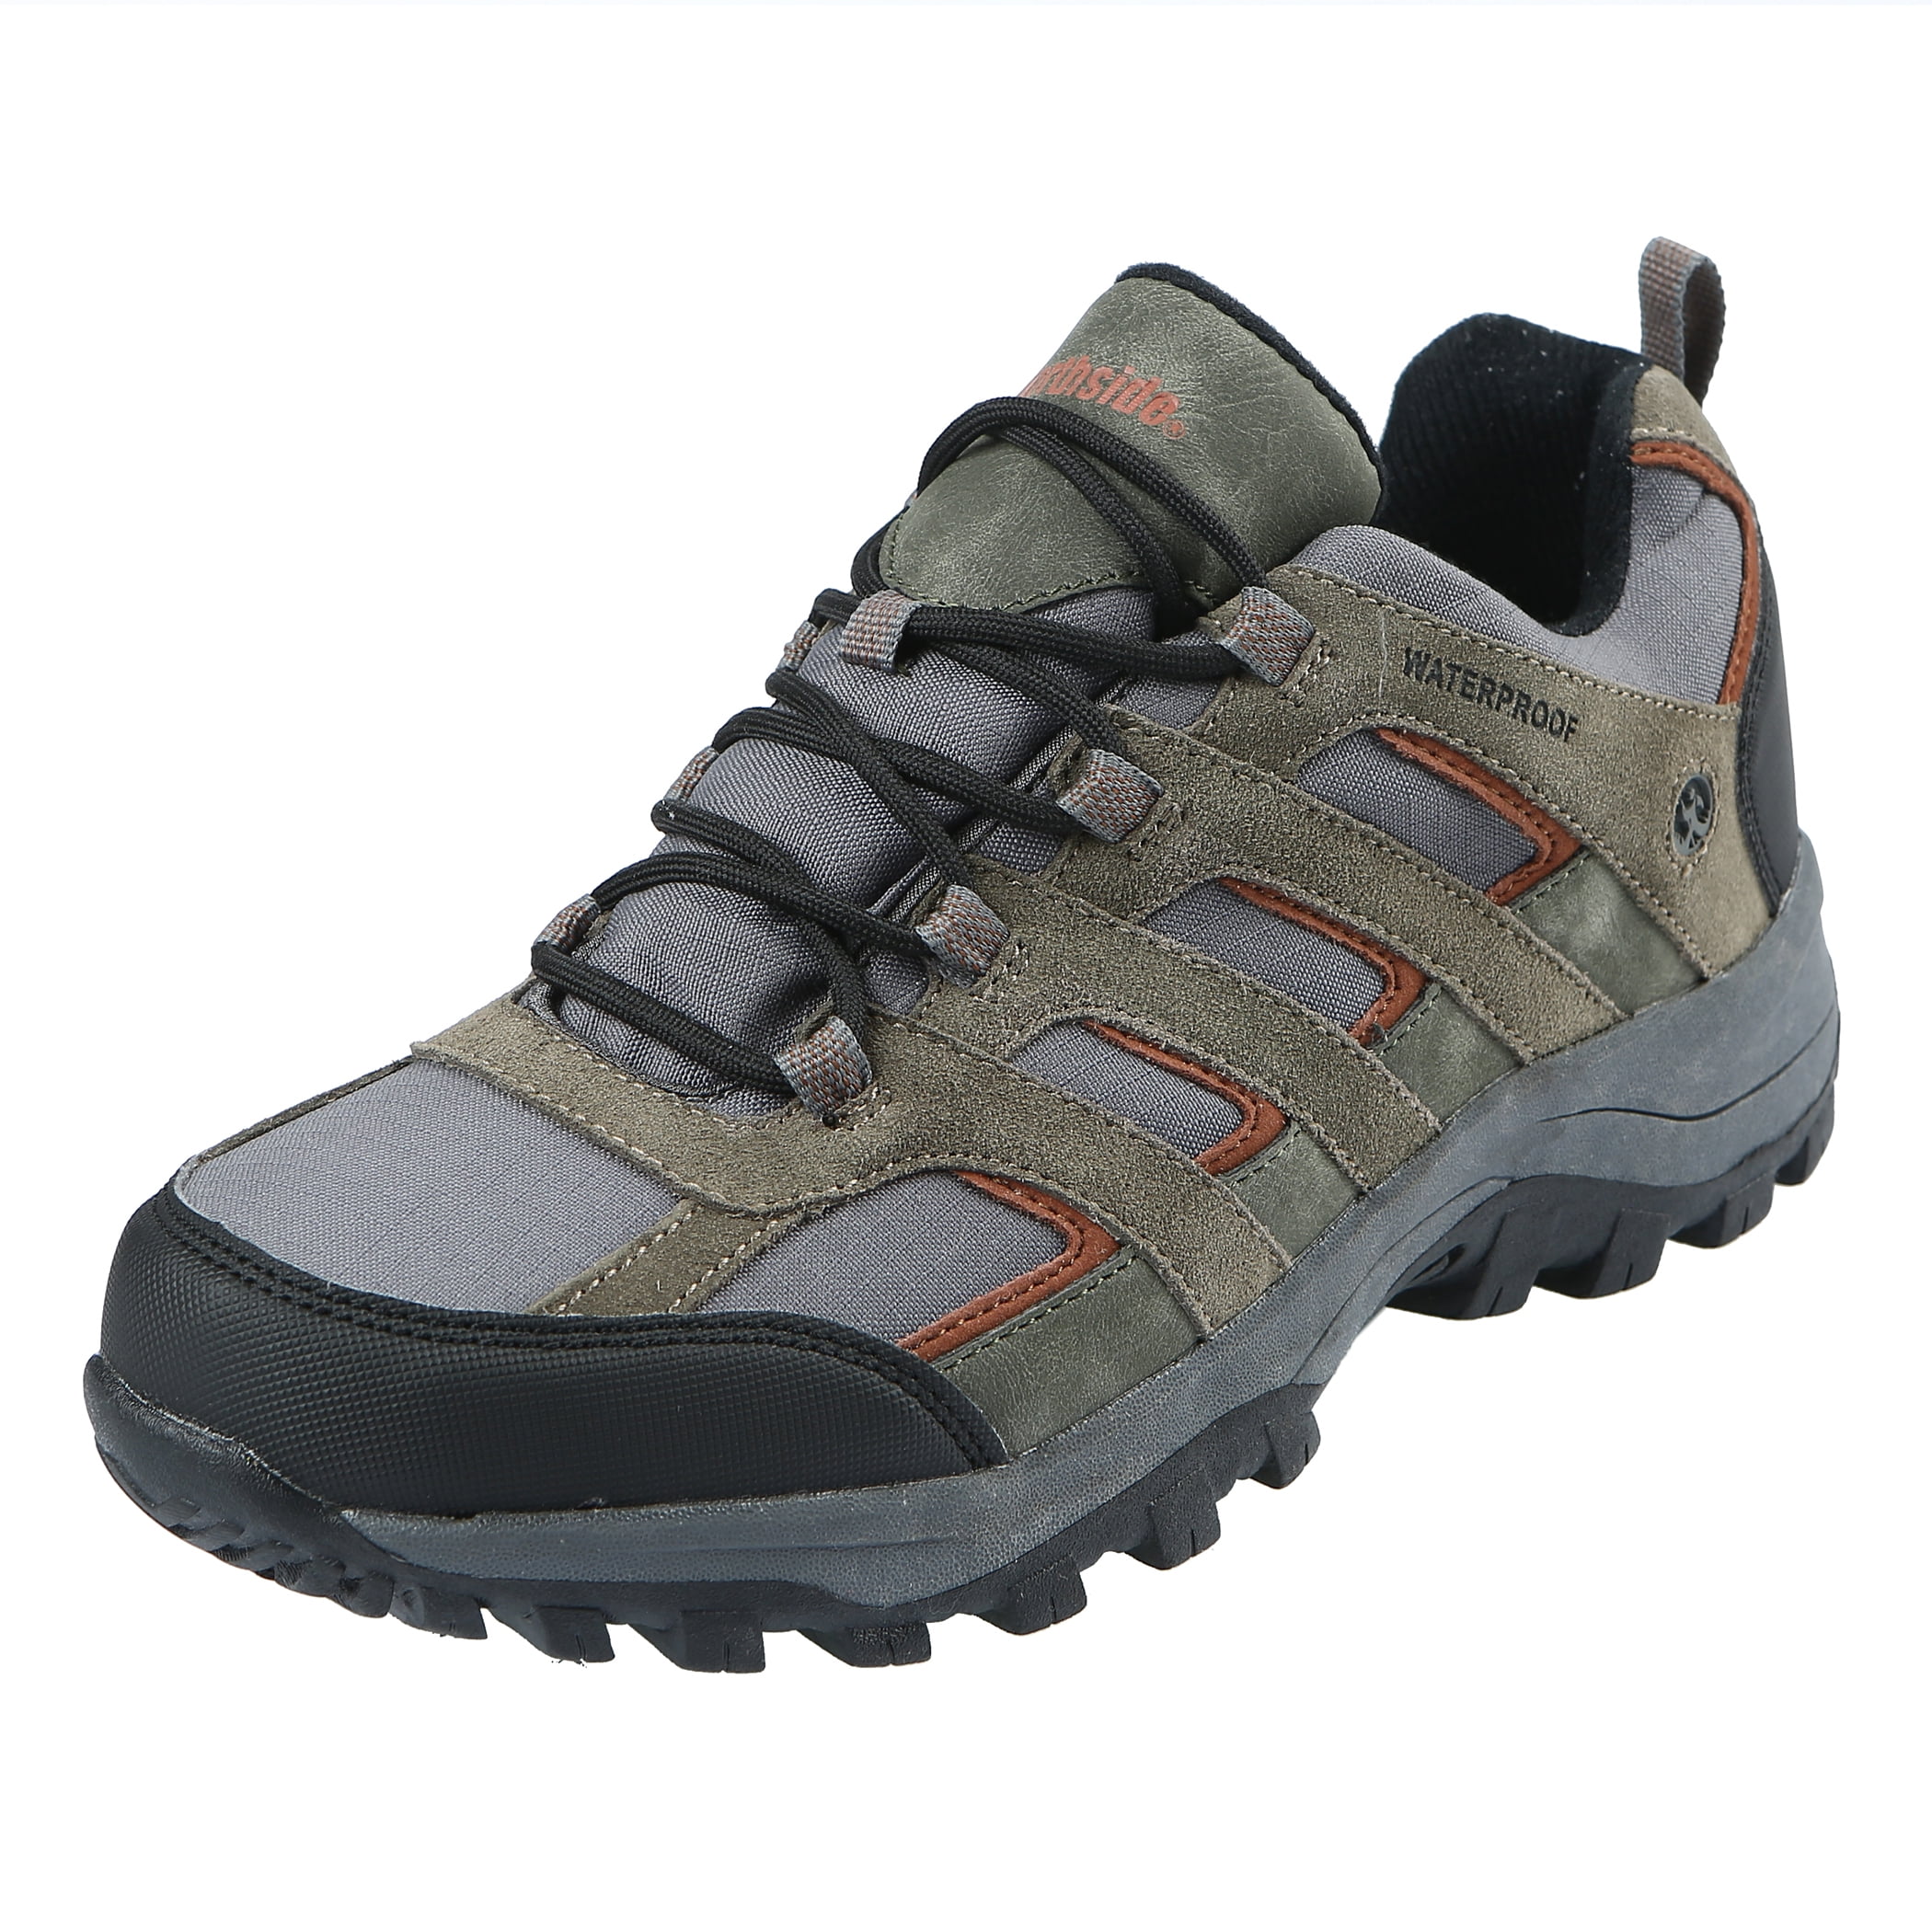 Hiking Shoes Shoes Non-slip Thicken Trail Shoes 2021 Best Waterproof Unisex 